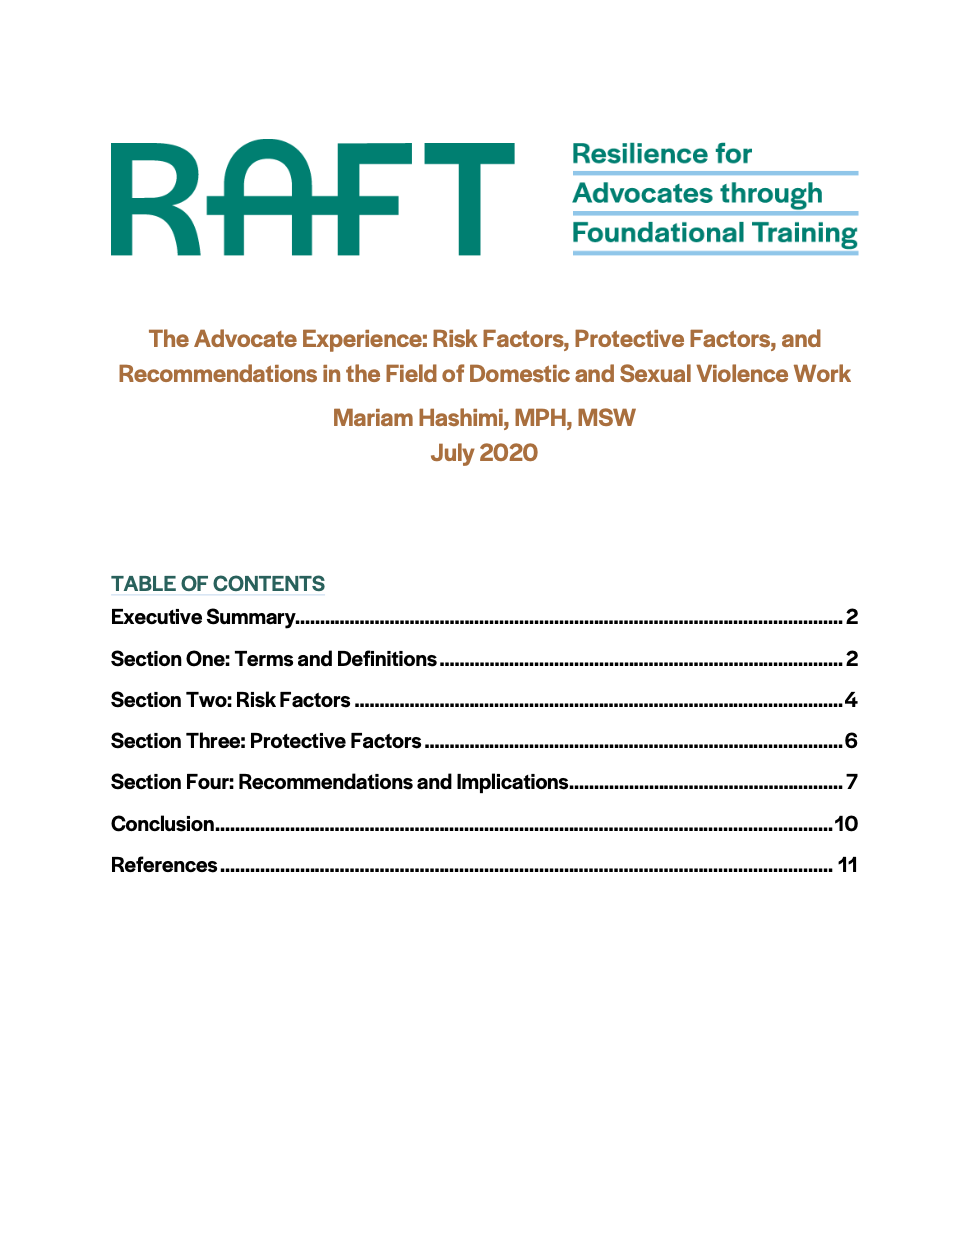 RAFT The Advocate Experience White Paper 2020 cover image